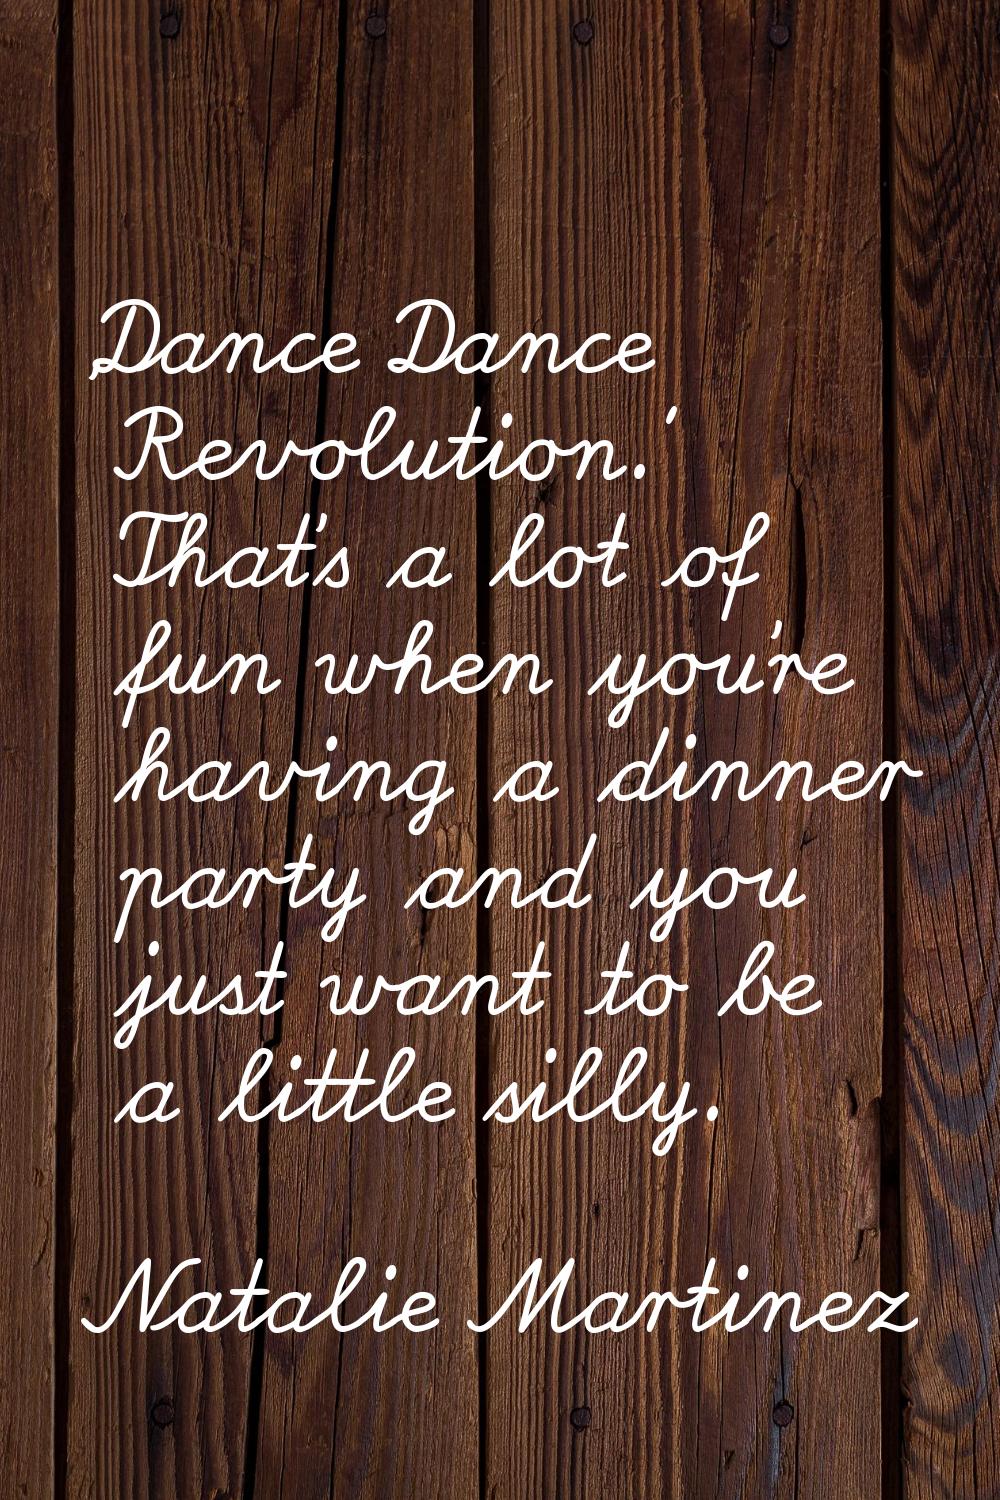 'Dance Dance Revolution.' That's a lot of fun when you're having a dinner party and you just want t